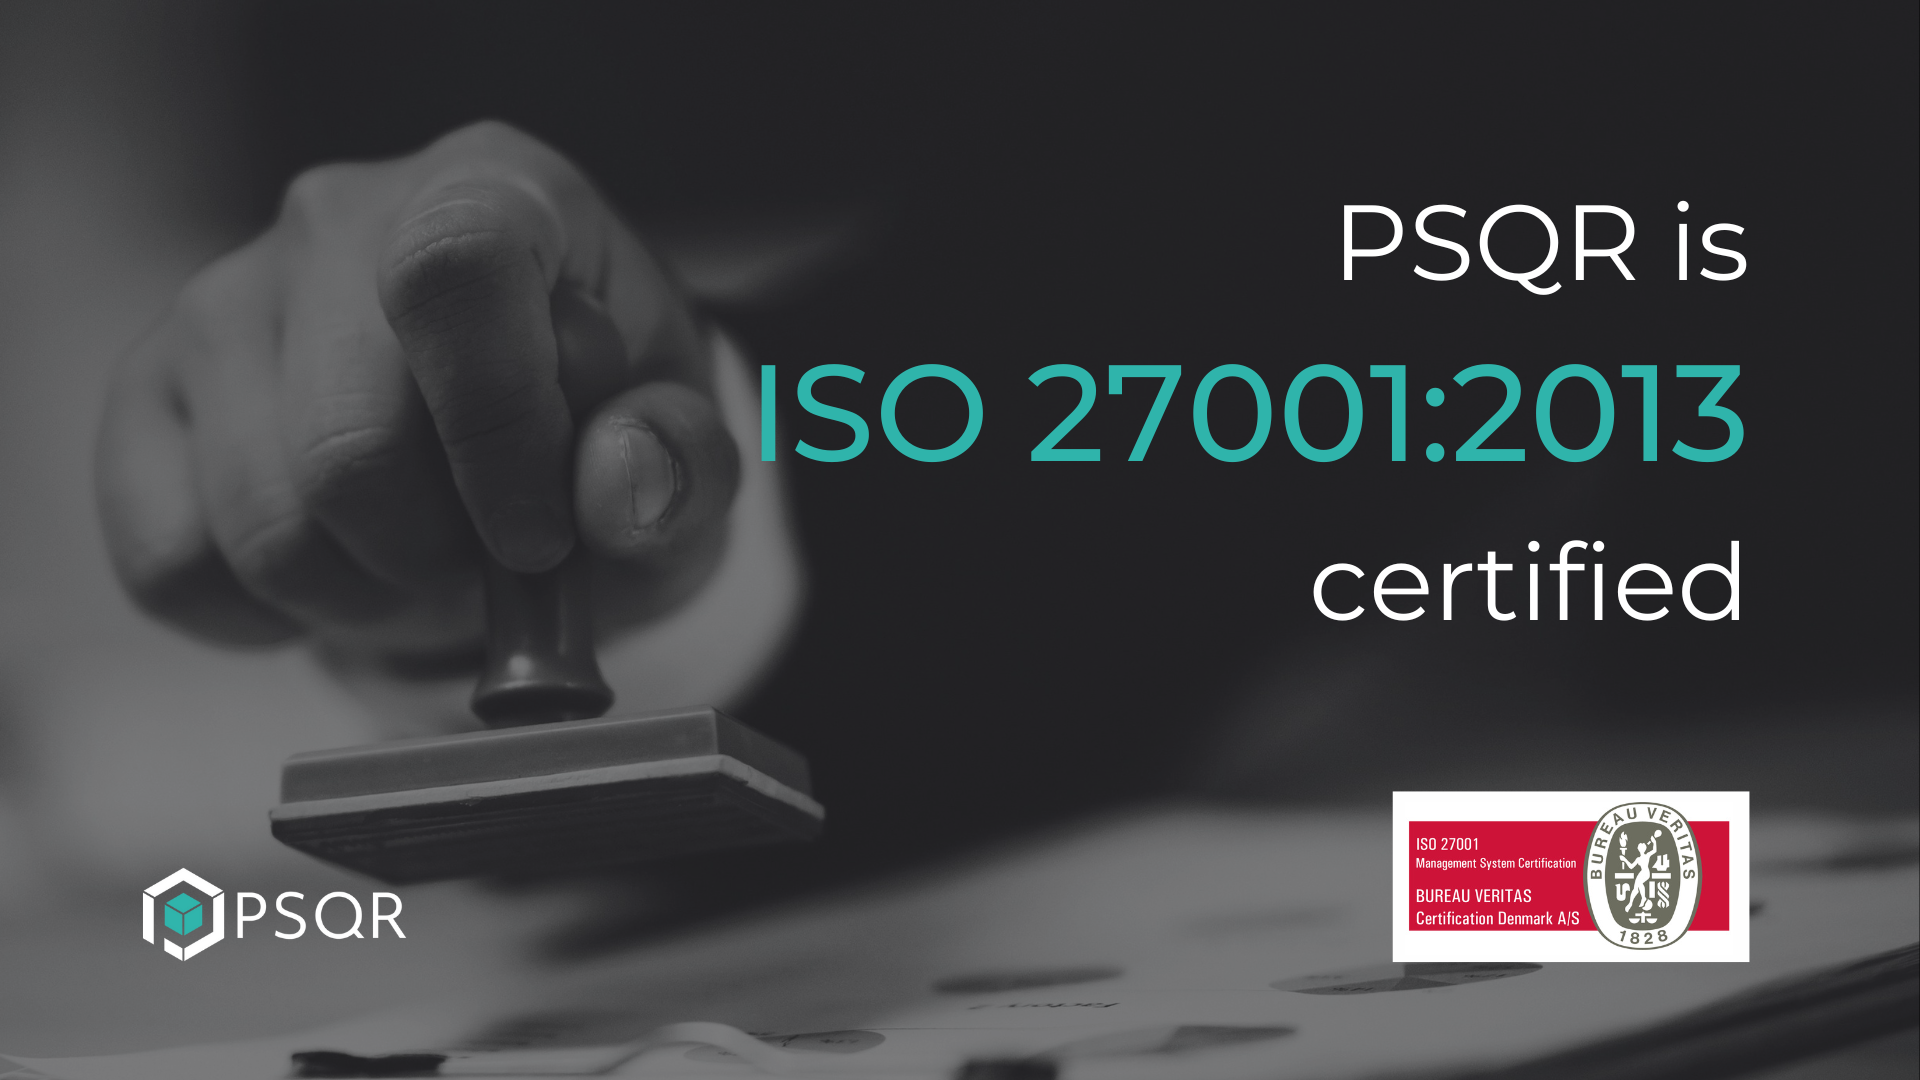 PSQR is ISO 27001 certified